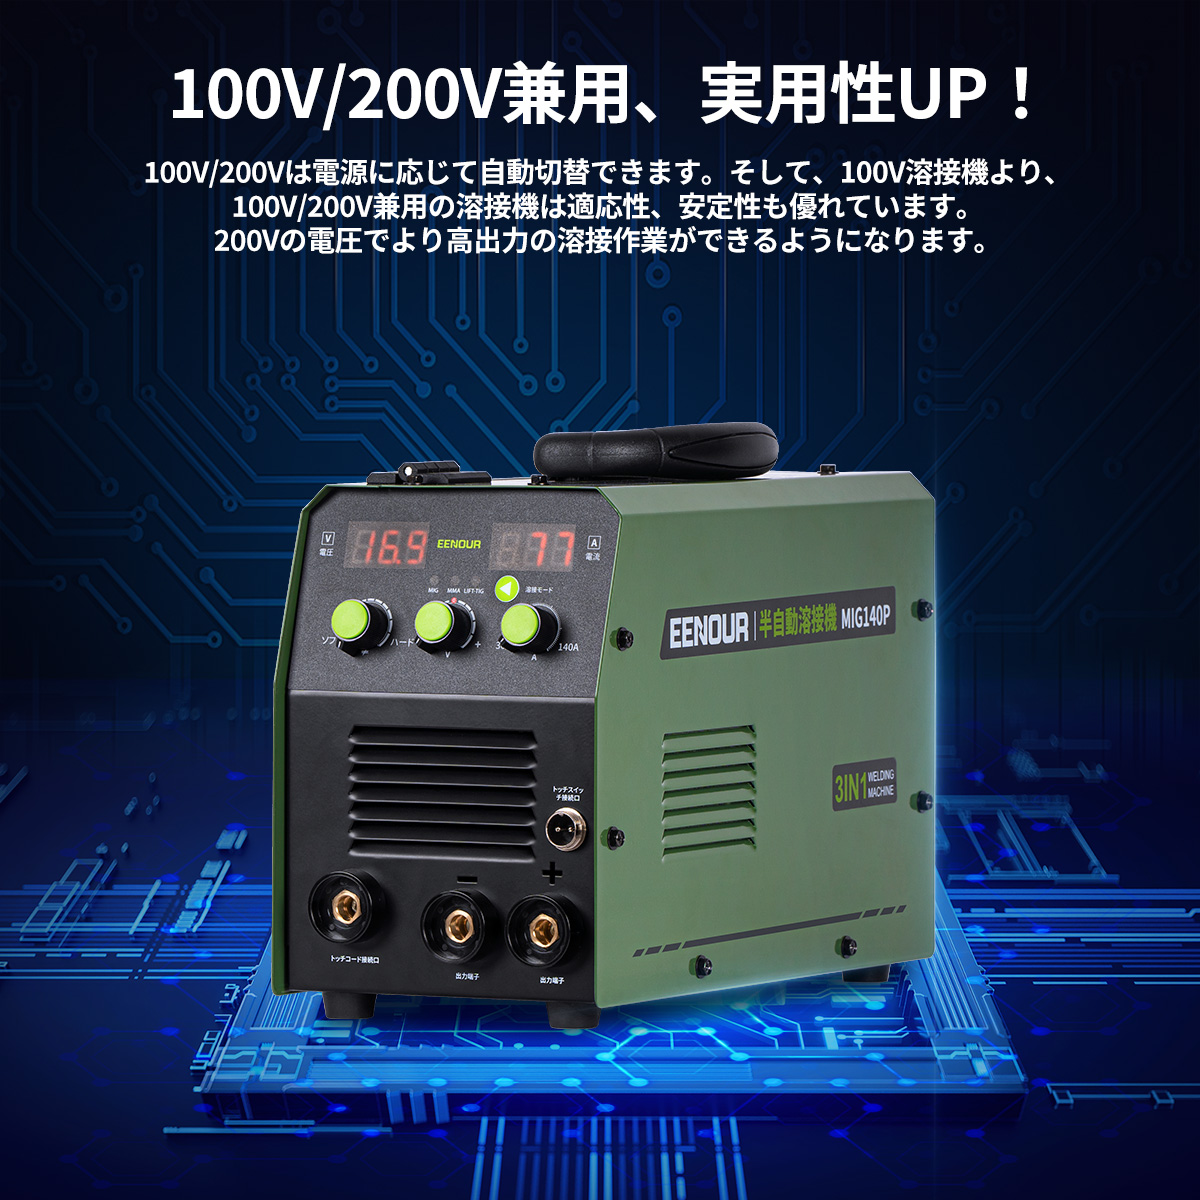 < coupon .23900 jpy &9% restoration > EENOUR semi-automatic welding machine MIG140P 100V 200V combined use applying 8.0mm maximum 140A 1 pcs 3 position inverter installing welding machine arc welding non gas 